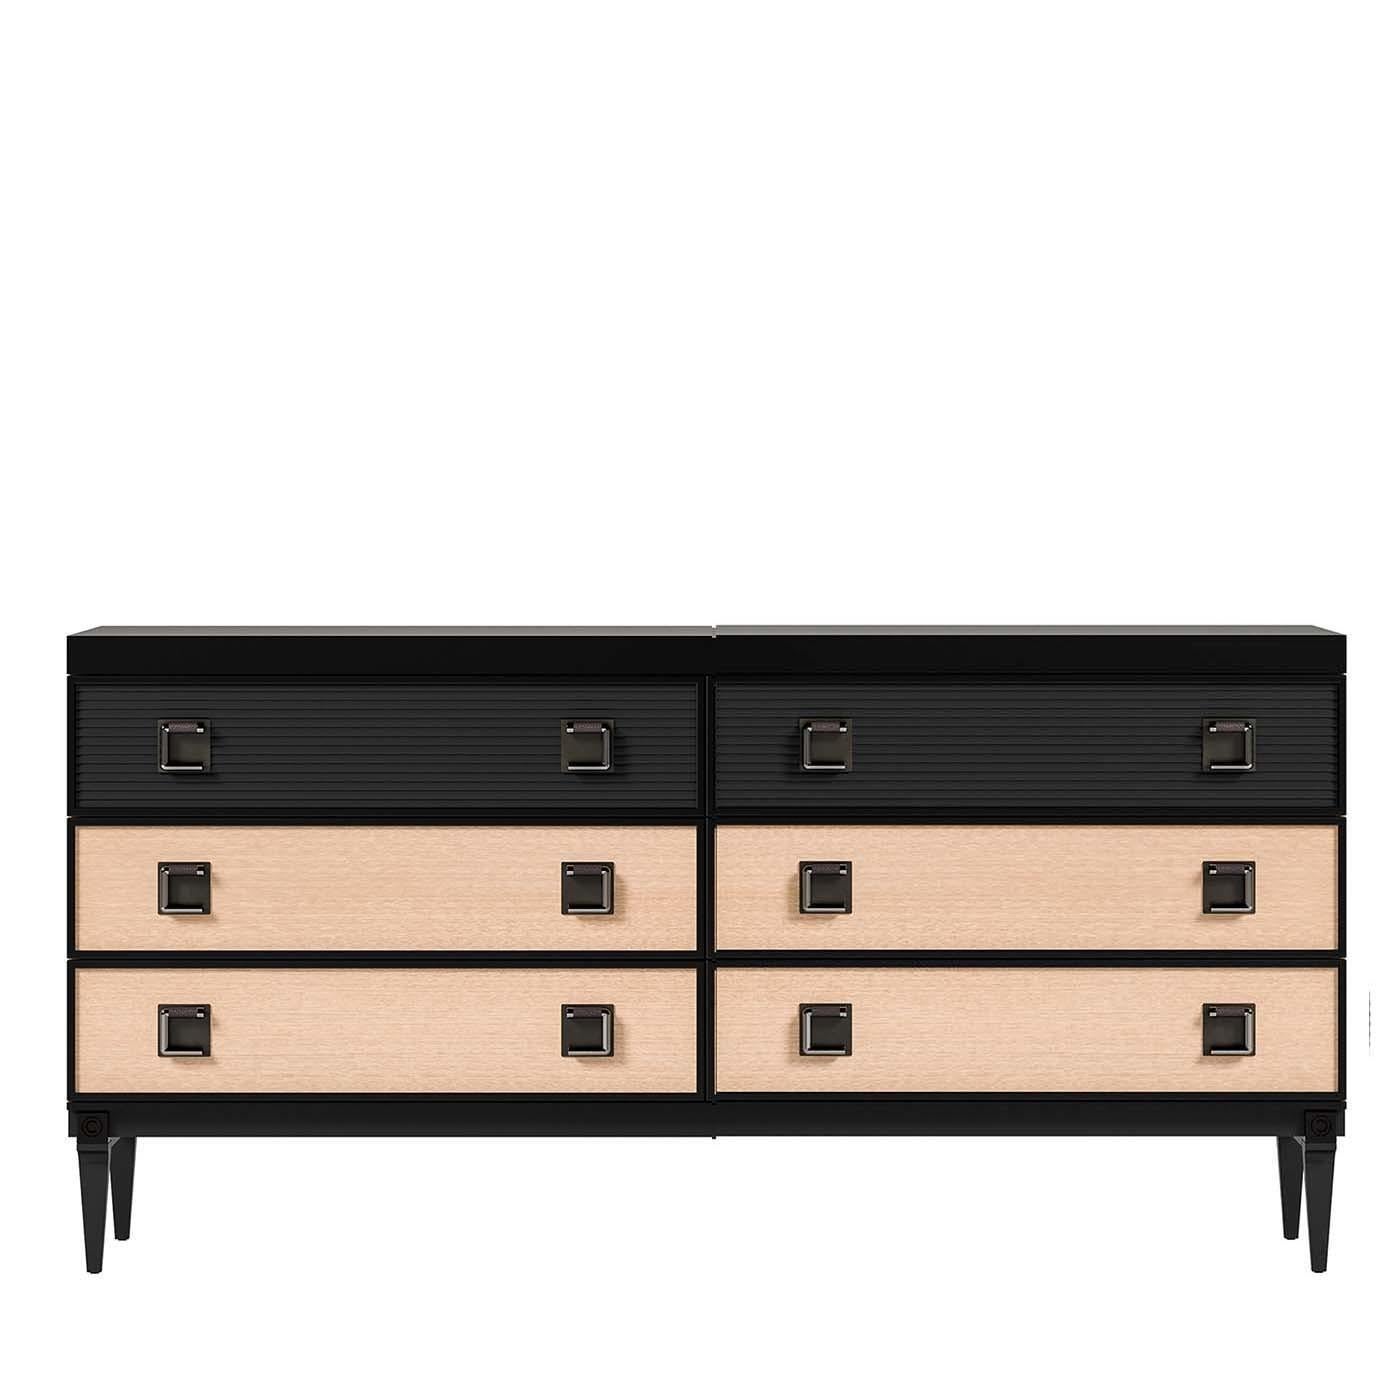 Stately and versatile, this six-drawer dresser blends functionality with artistic appeal. The rectangular frame is fashioned of eucalyptus veneer with a black-lacquered finish and beige panels on the sides and only on the four bottom drawers (the